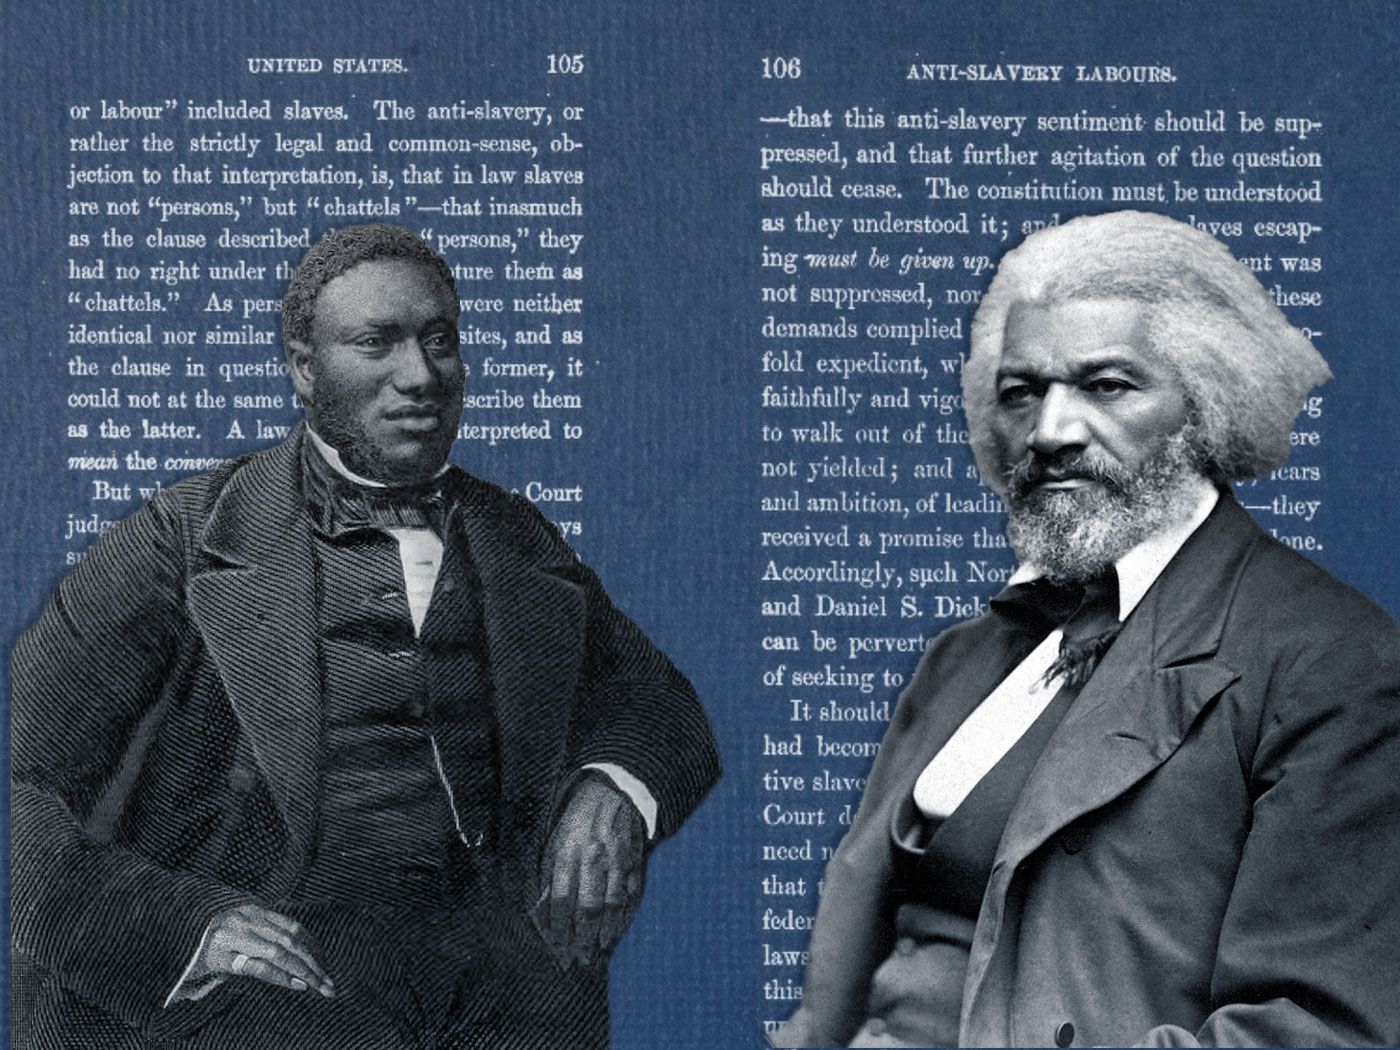 Frederick Douglass Thought This Abolitionist Was a 'Vastly Superior' Orator and Thinker